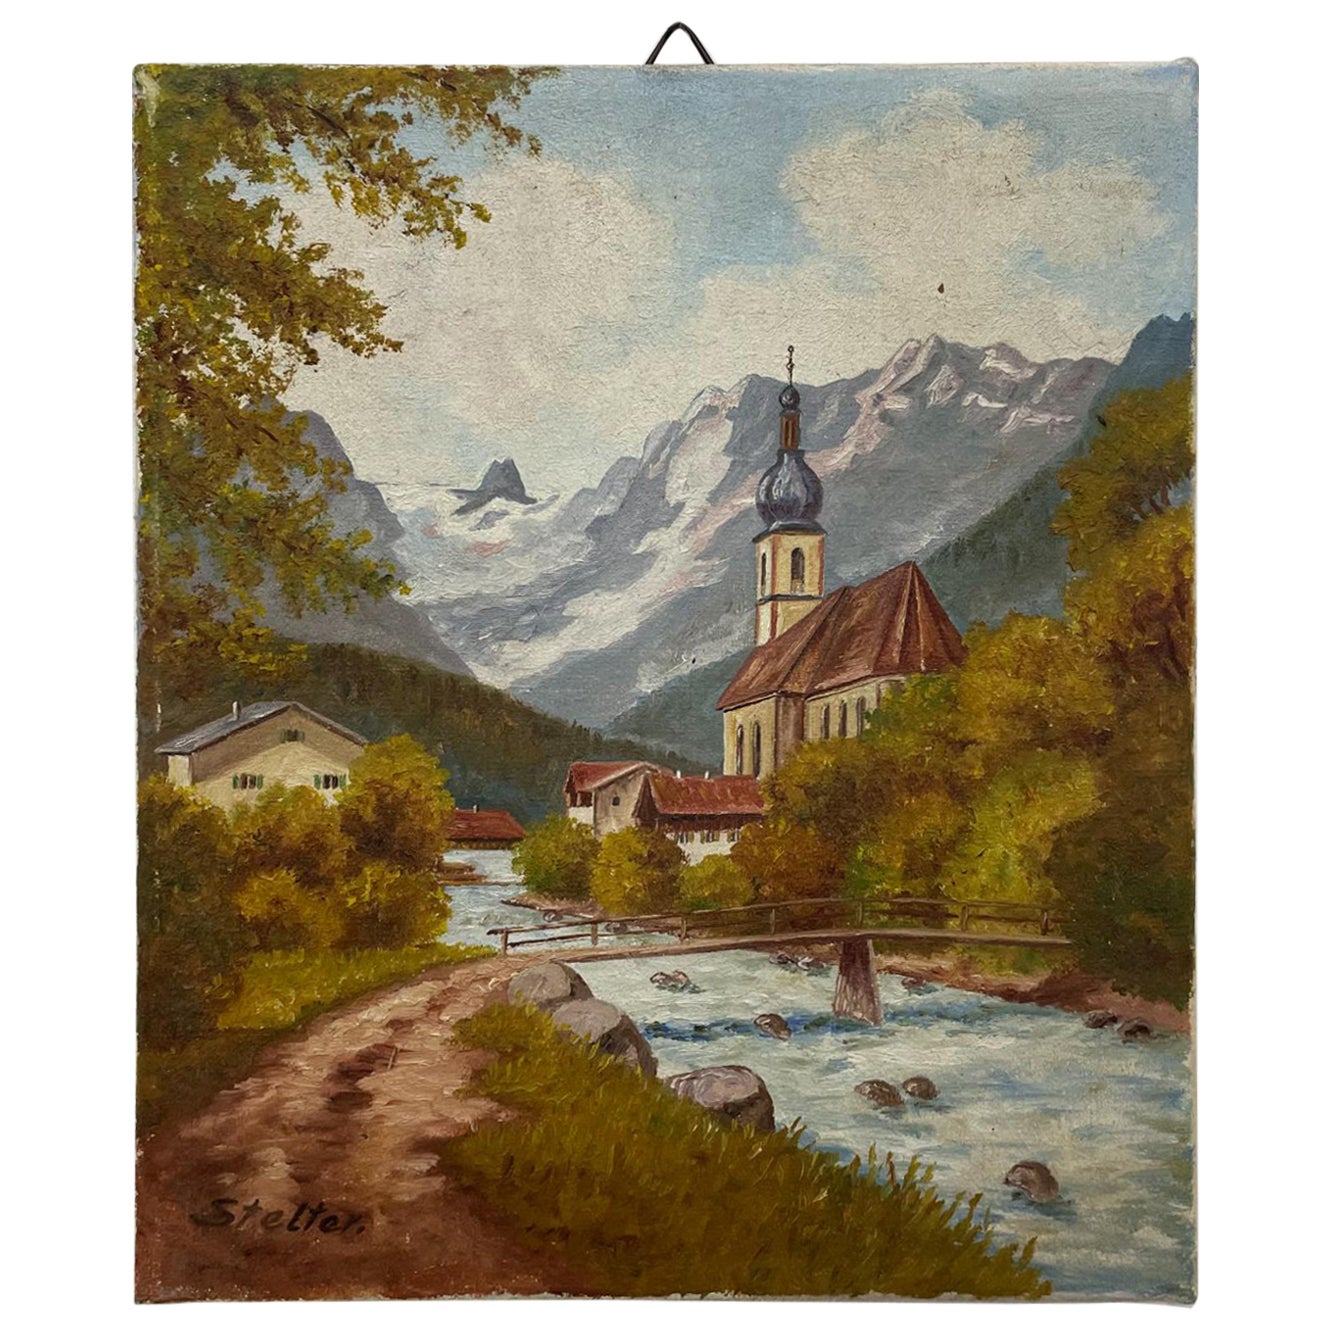 Vintage German Painting Small Oil on Canvas Scenic Landscape by Stelter, 1950s